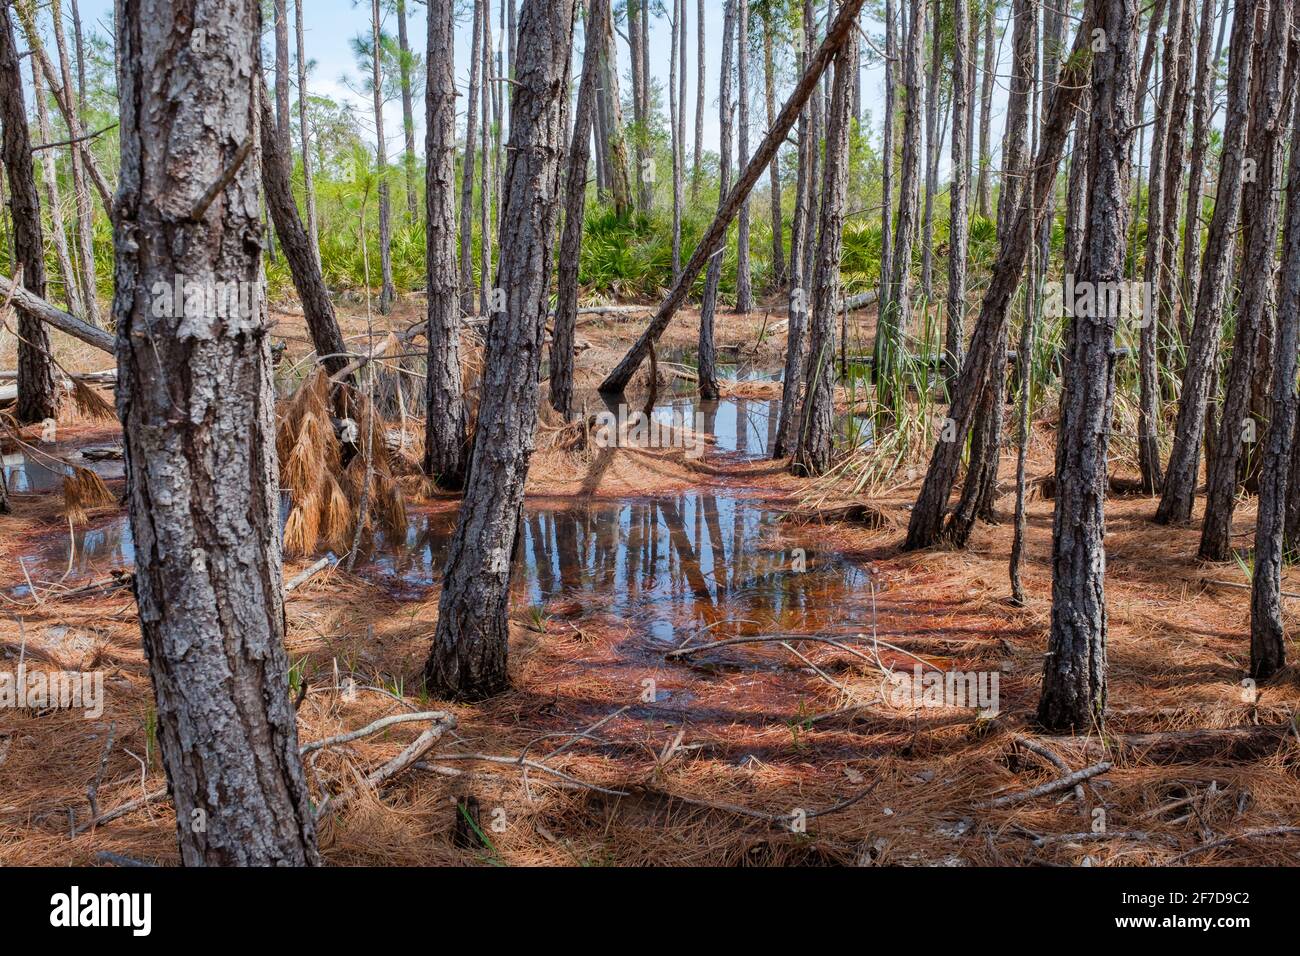 Pine forest swamp in Bon Secour National Wildlife Refuge in Gulf Shores, Alabama, USA Stock Photo